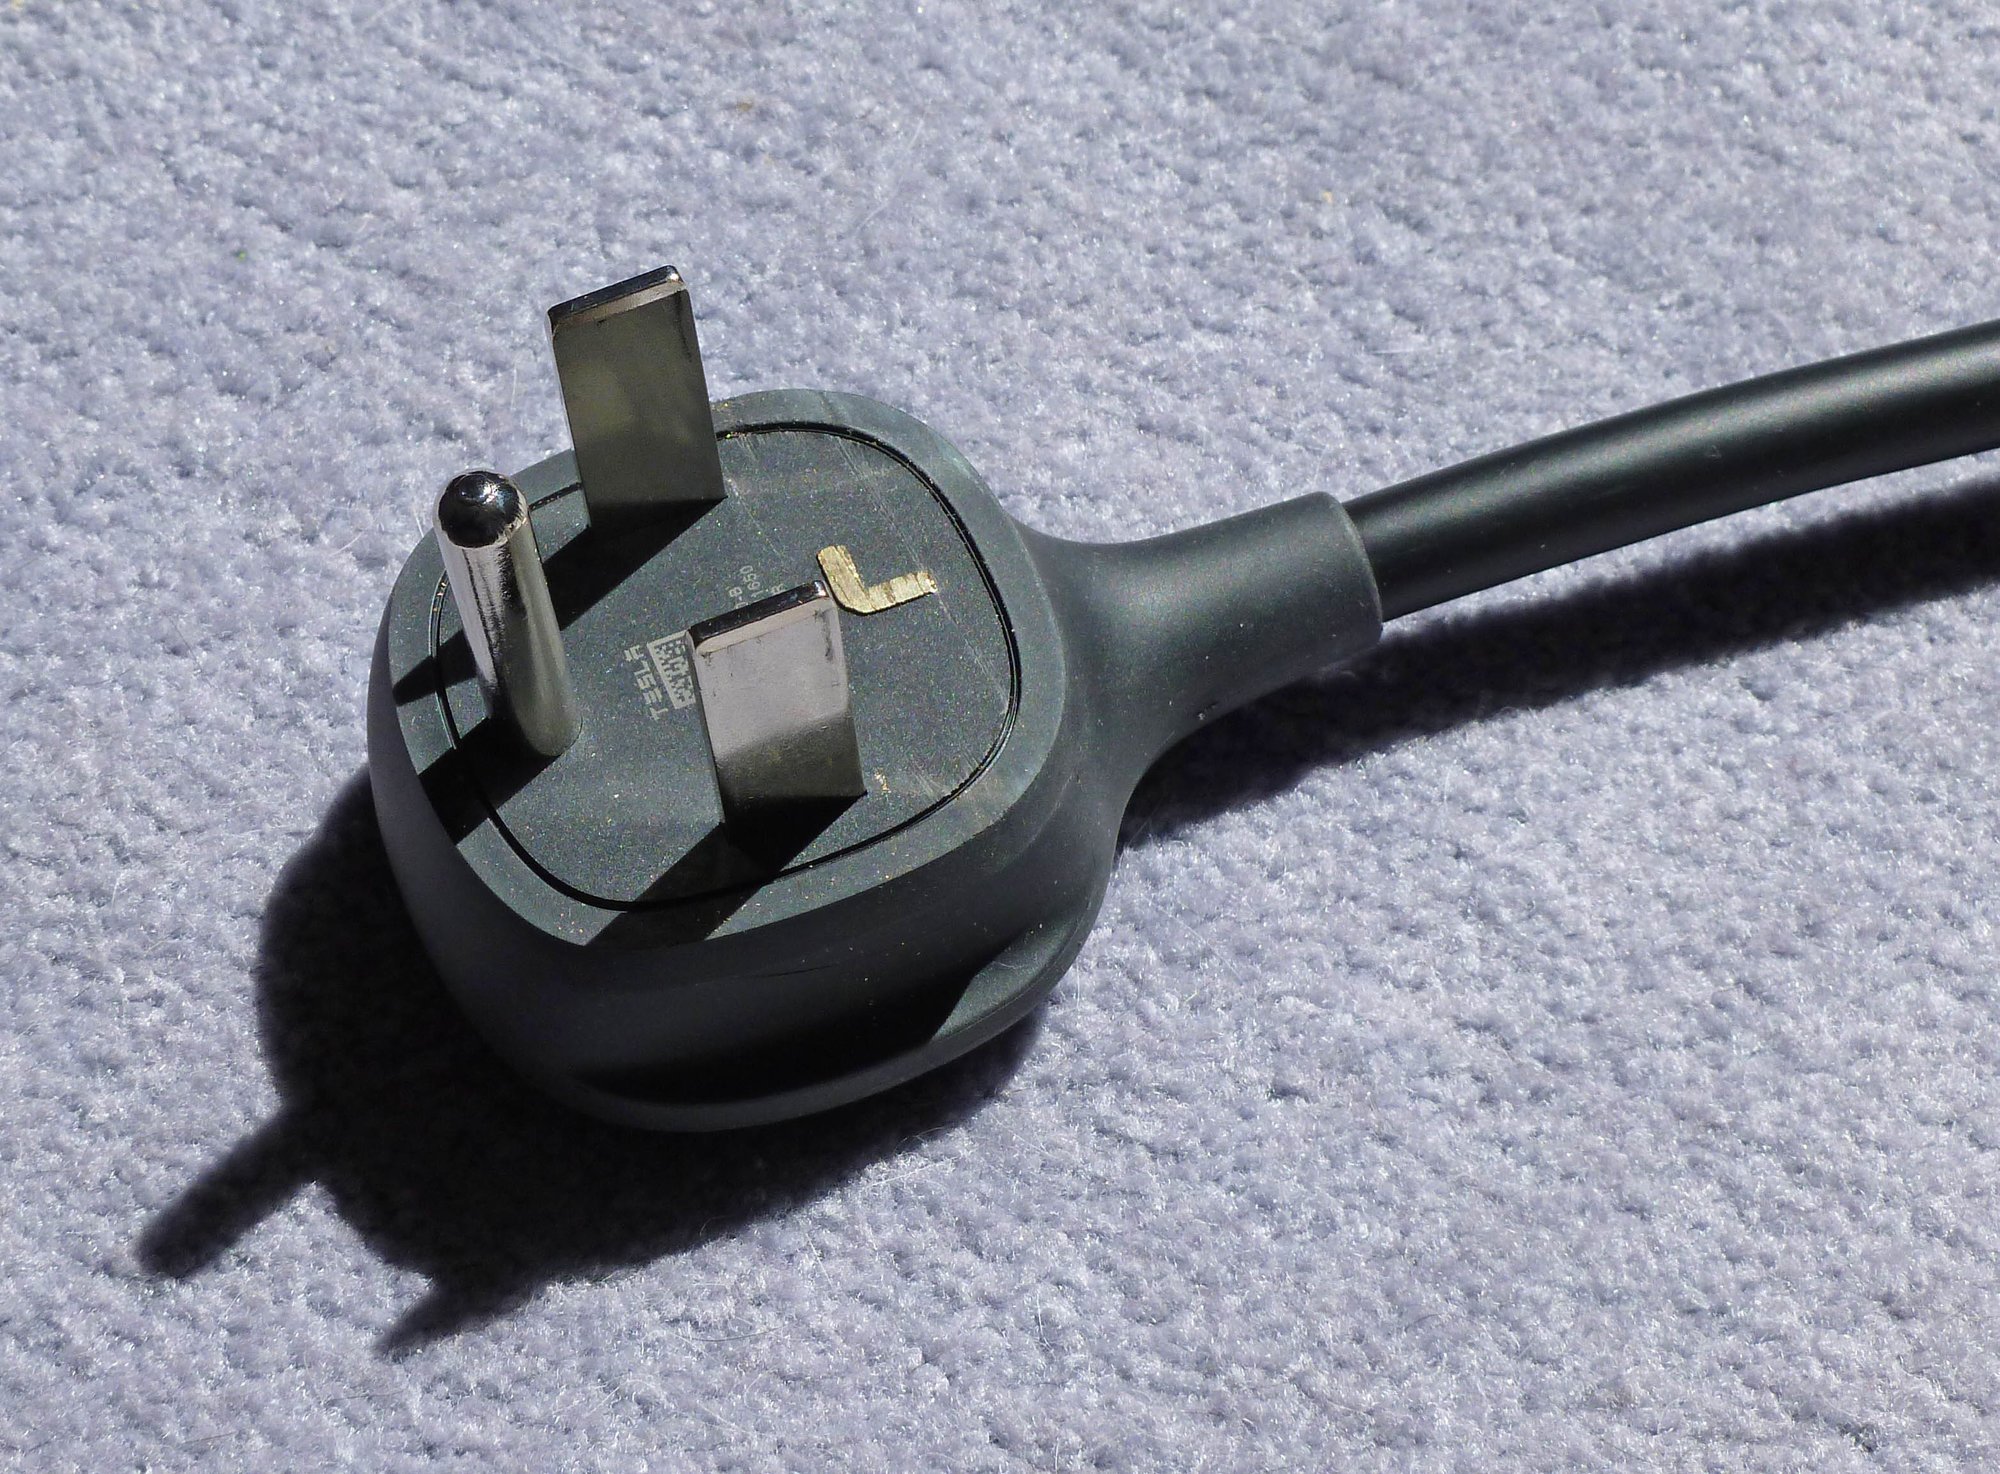 14-30 adapter with neutral pin removed2352crop 3-26-20.JPG